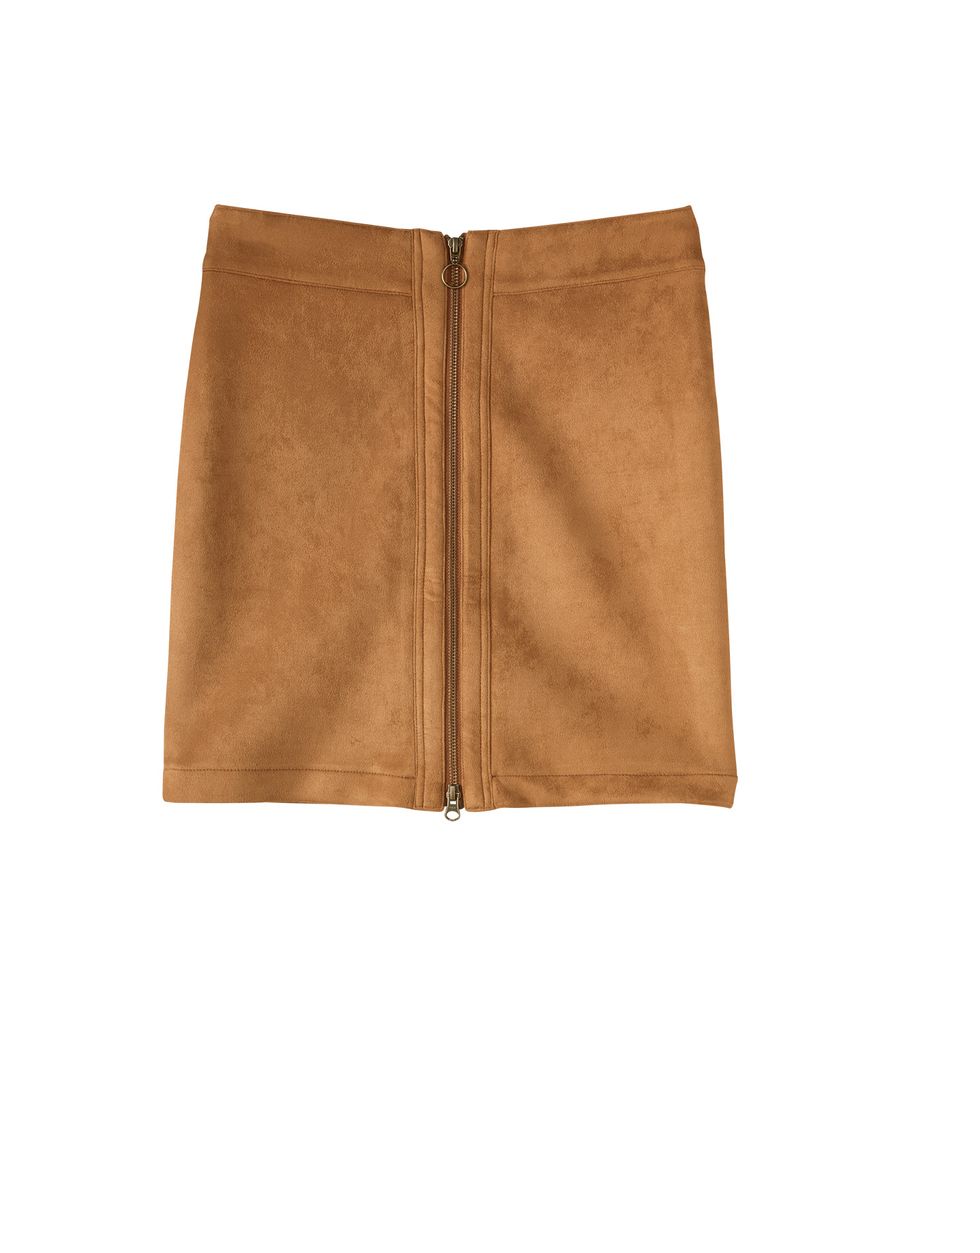 Tan, Clothing, Brown, Leather, Beige, Pocket, Shorts, 